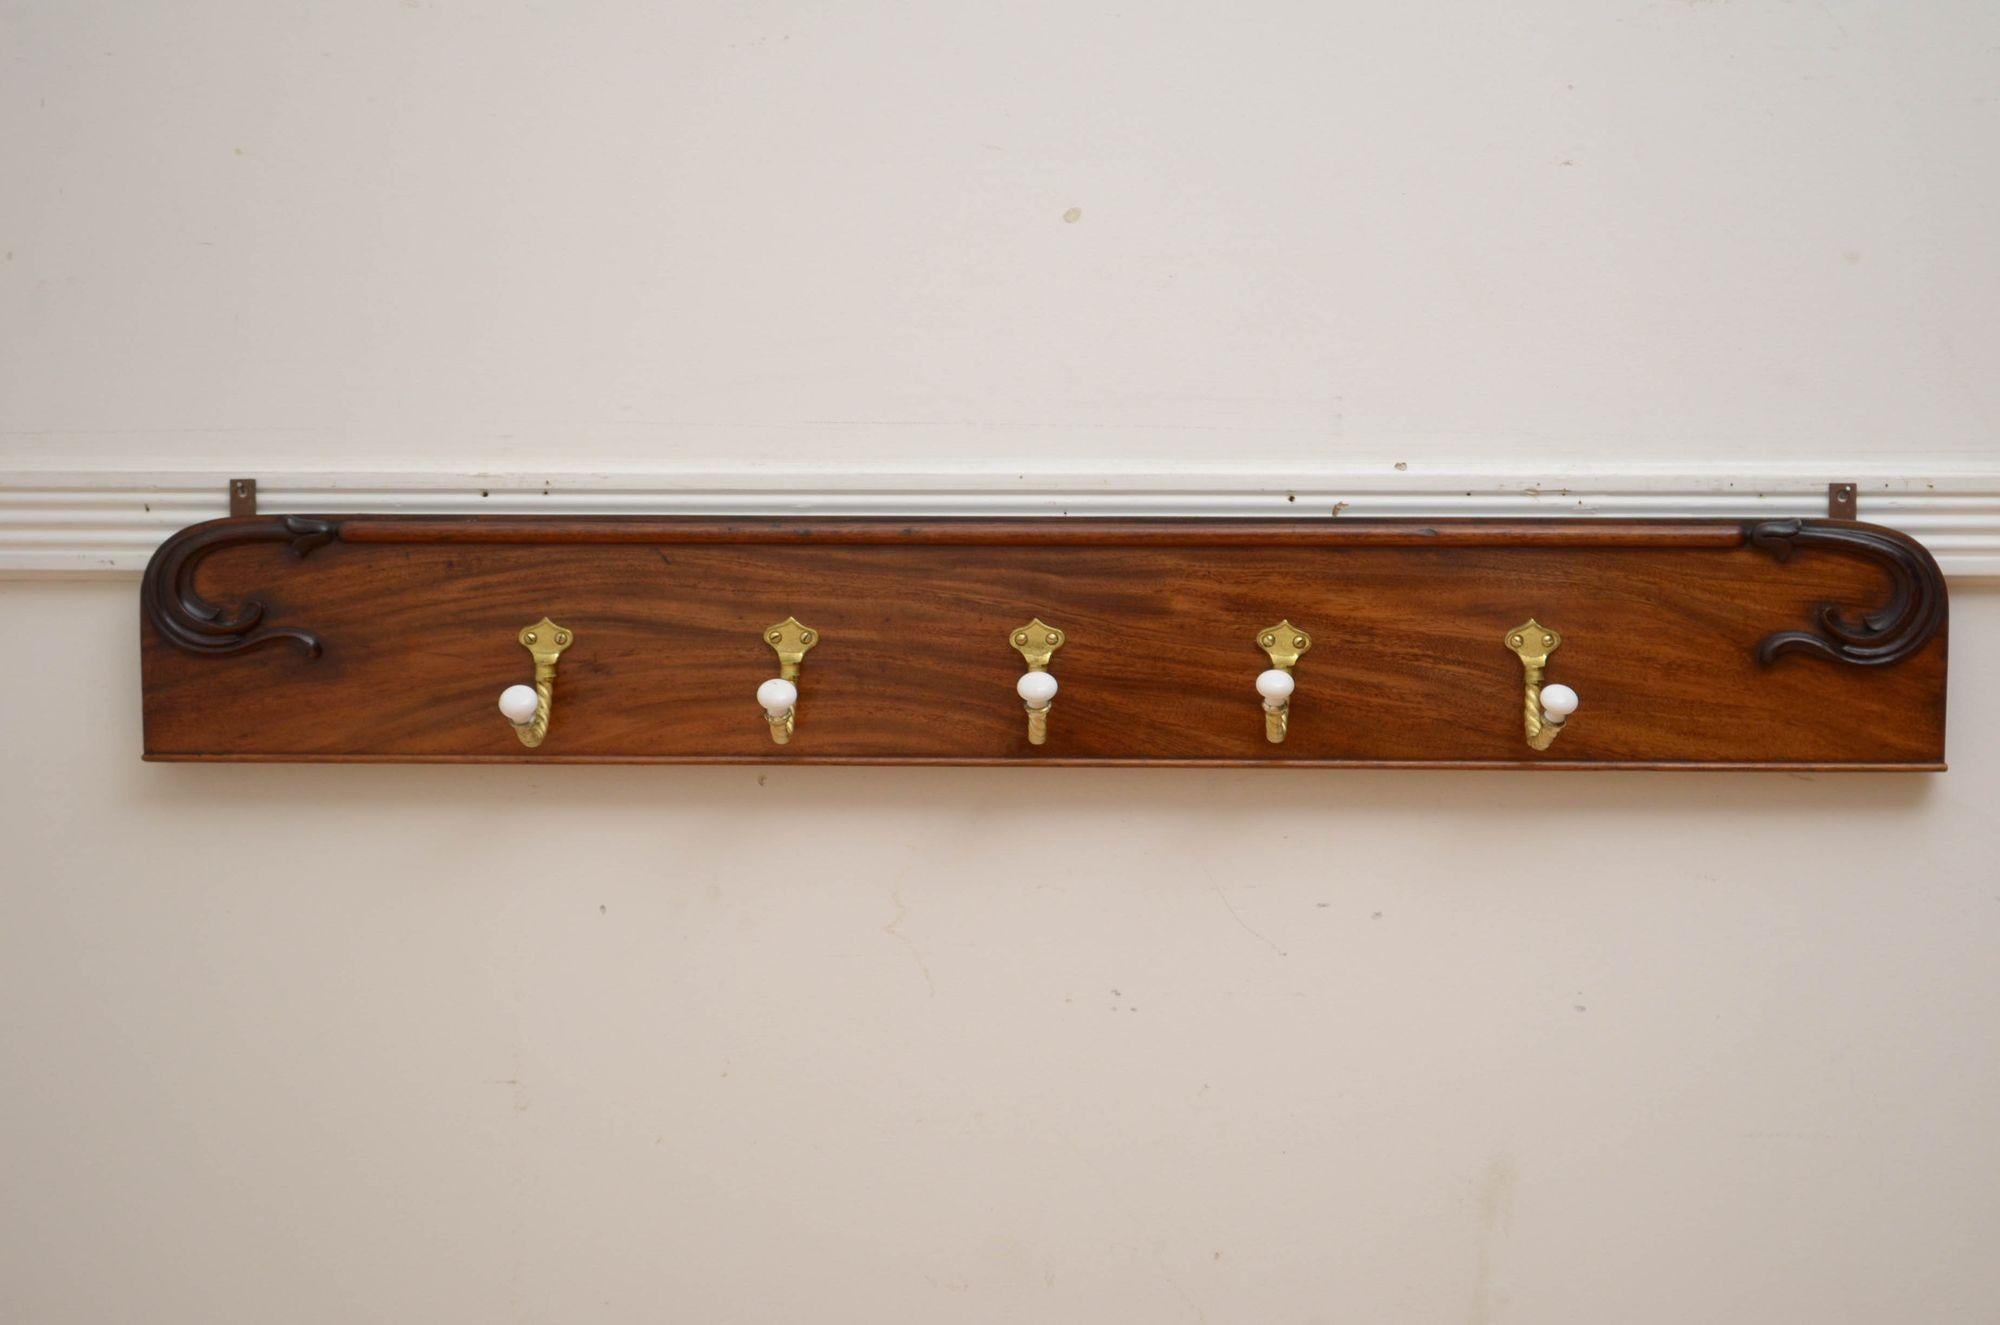 K00300 Stylish and practical antique coat hooks with five very decorative, twisted rope hooks with ceramic ends on on William IV figured mahogany backing with finely carved scrolls, all fitted with hanging brackets, ready to place at home. XIXth